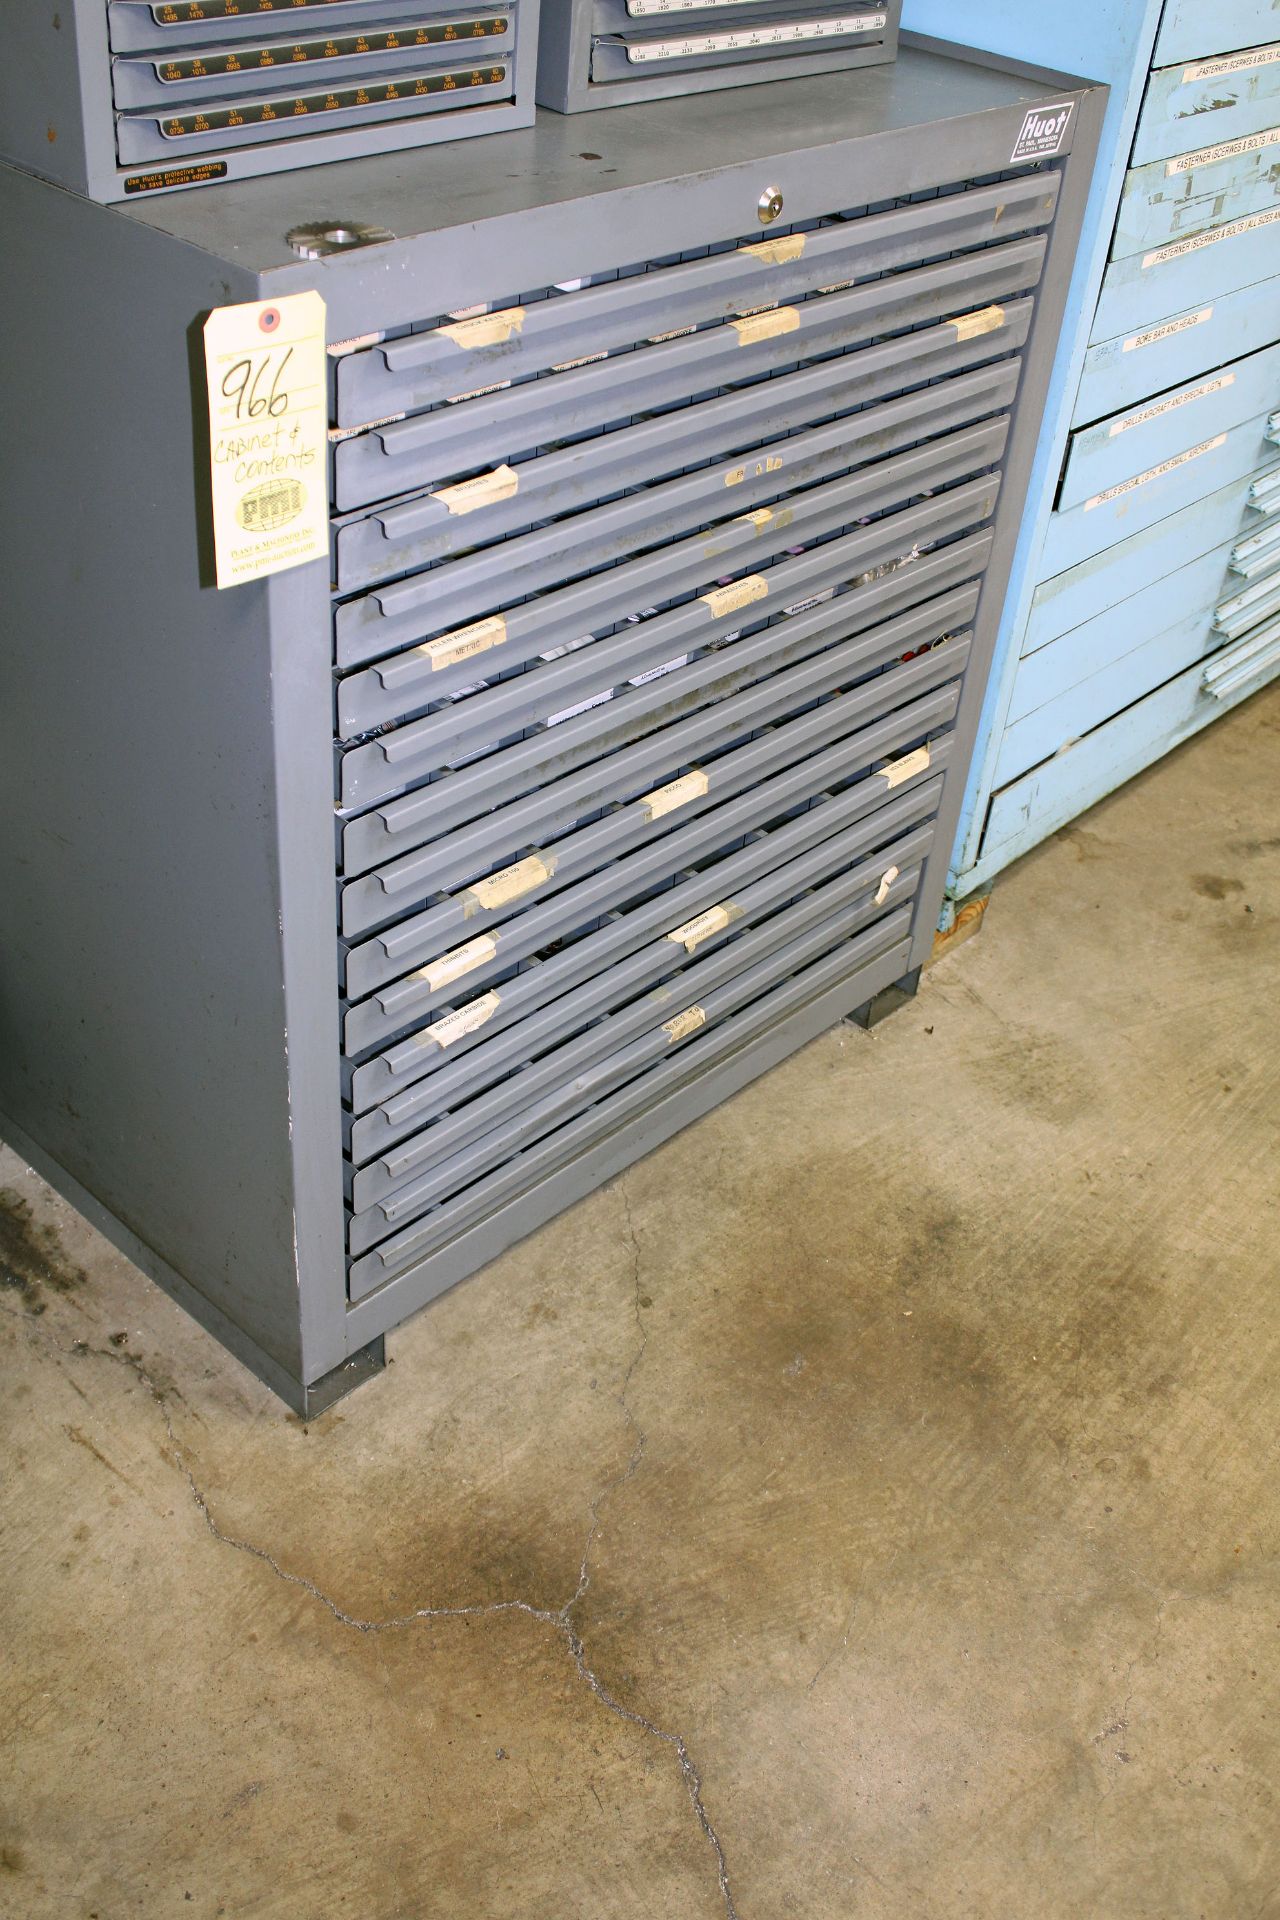 CABINET, HUOT, 15 DRAWER, 19" X 34" X 37" HEIGHT, WITH CONTENTS, CENTER DRILLS , JACOBES CHUCK KEYS,